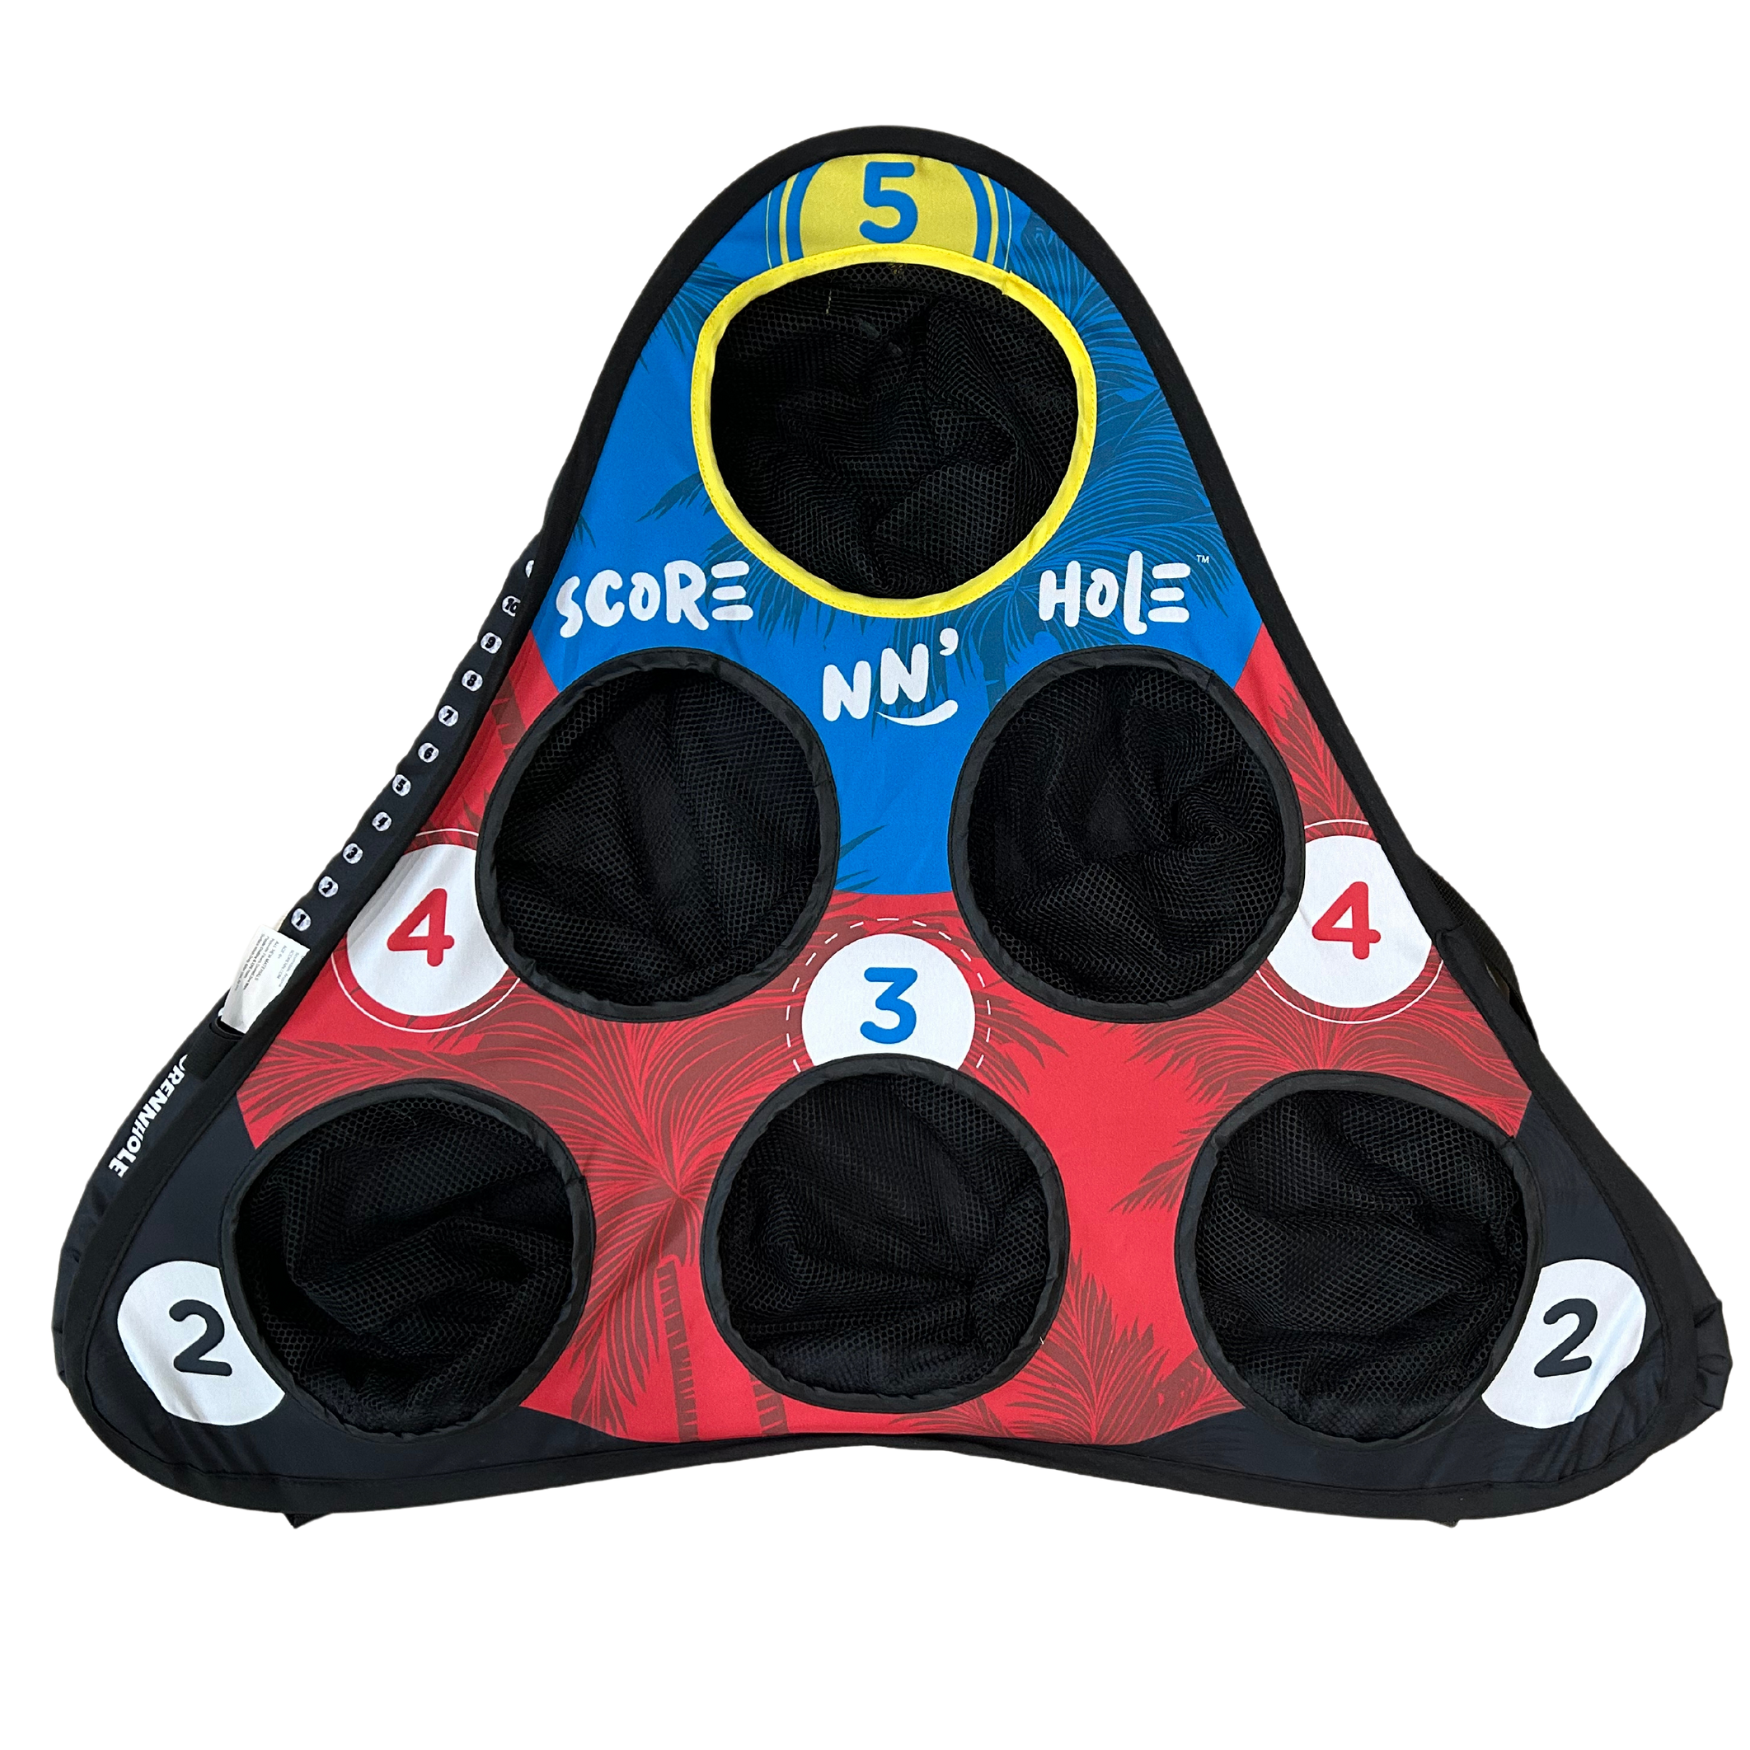 SCORE NN' HOLE Targets - Replacement Parts